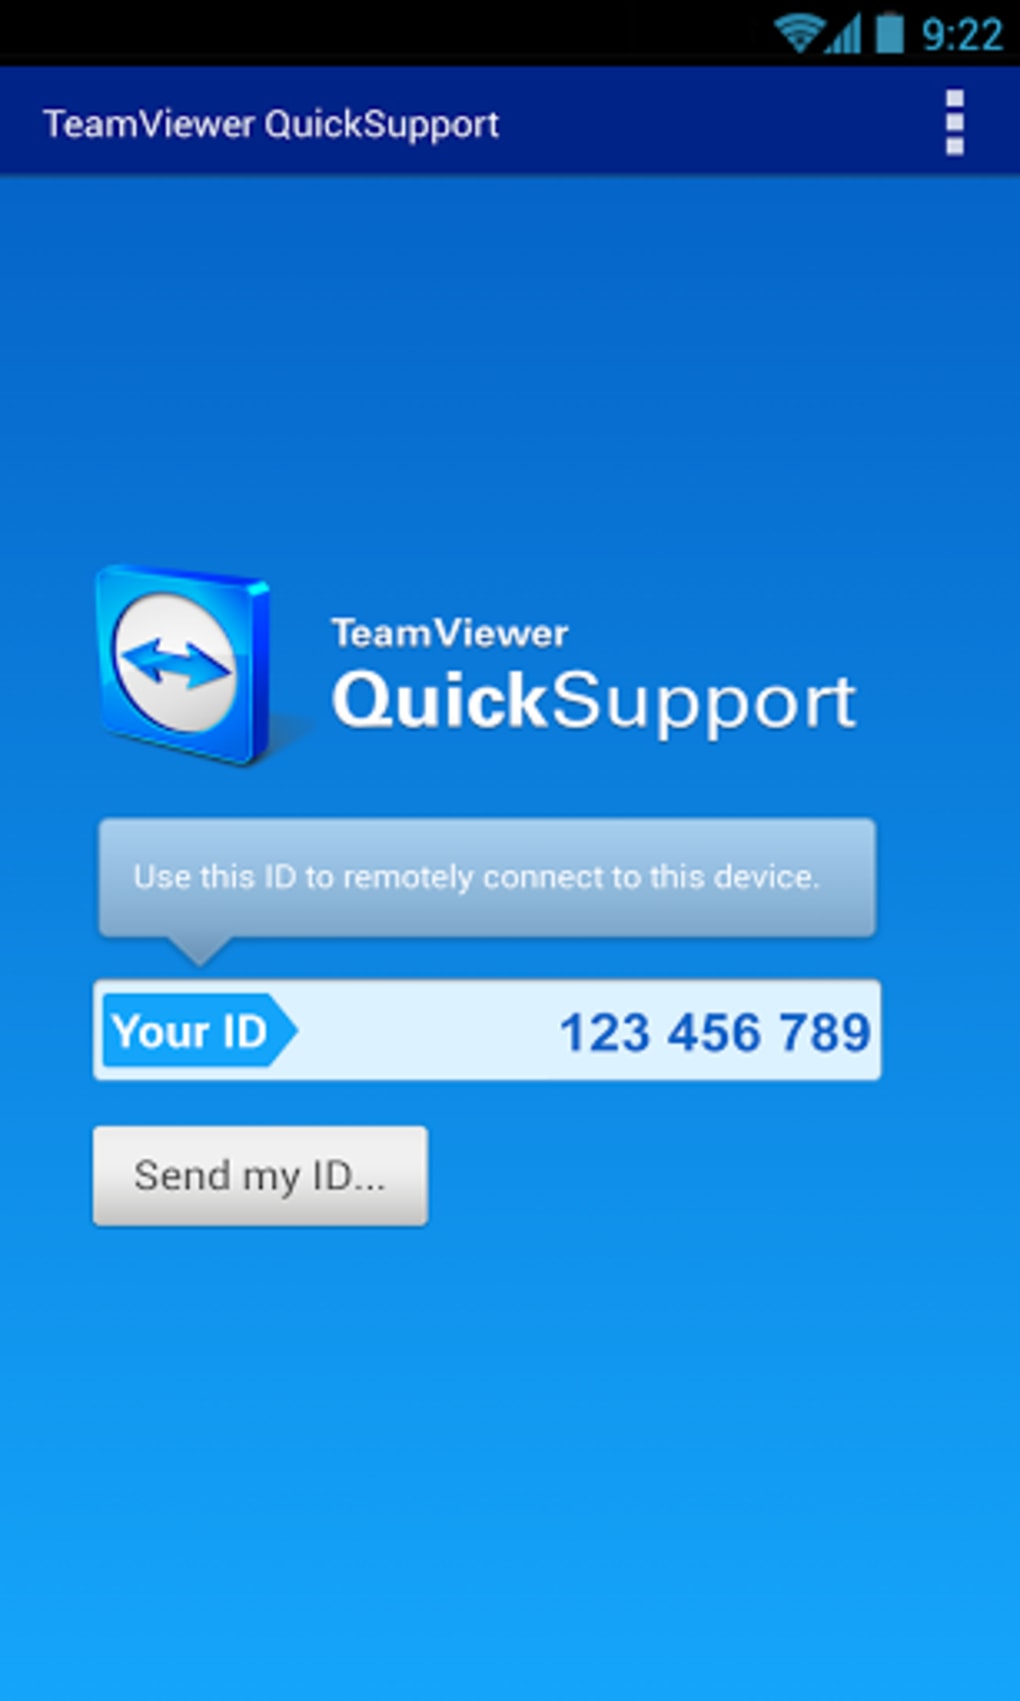 teamviewer logs out user